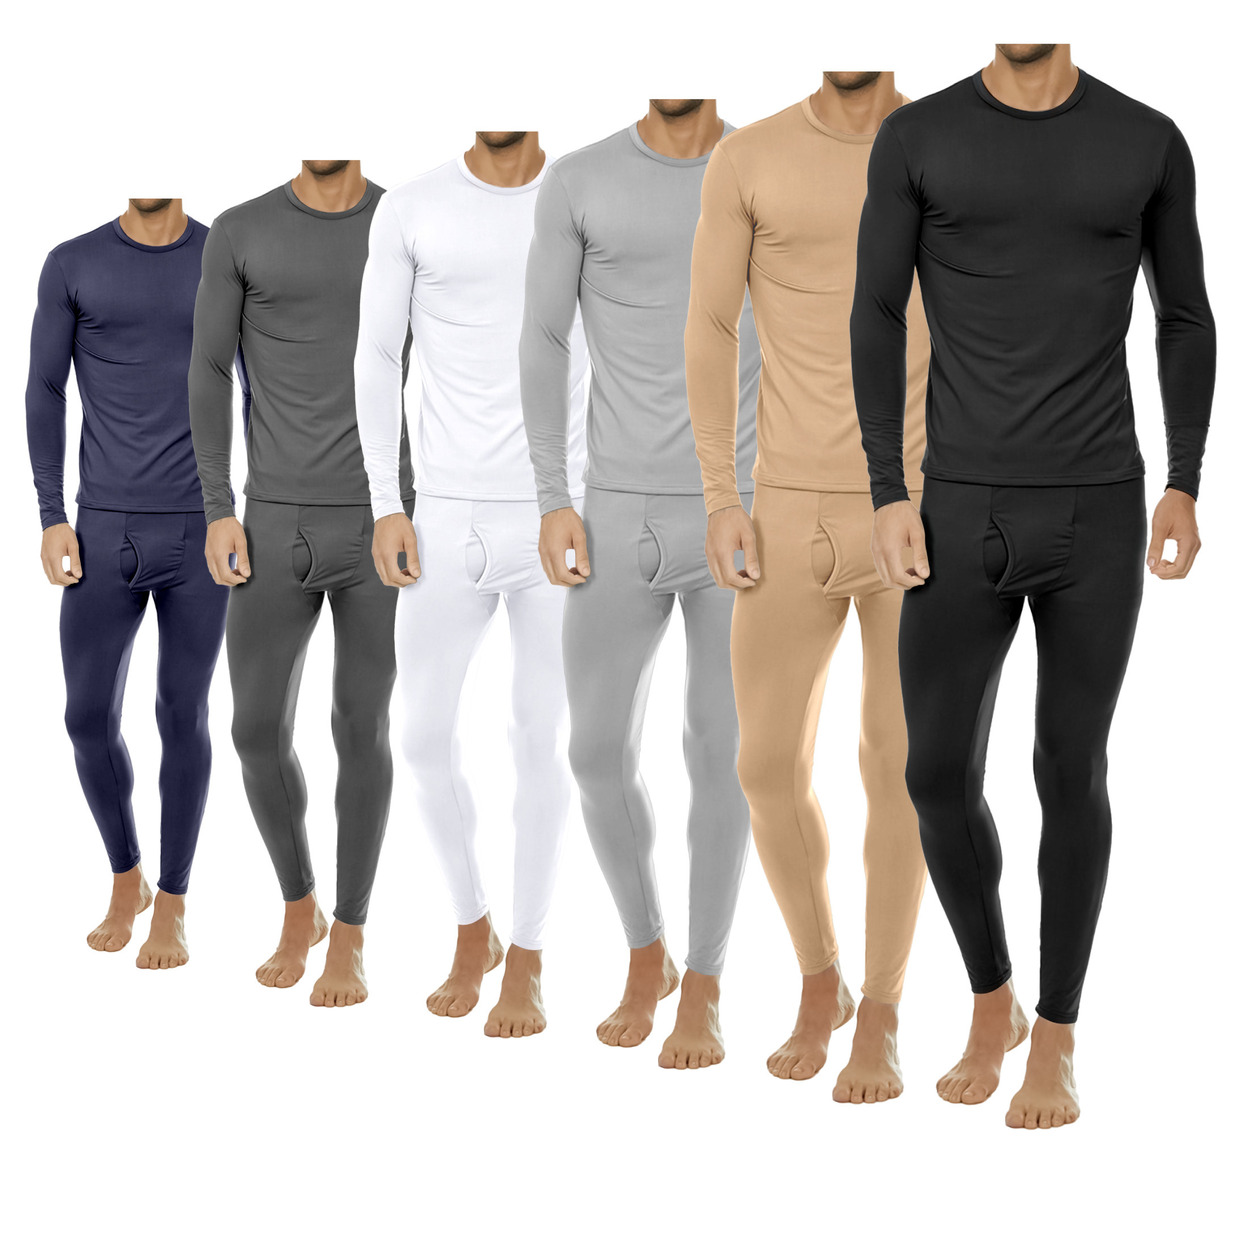 3-Sets: Men's Winter Warm Fleece Lined Thermal Underwear Set For Cold Weather - Small